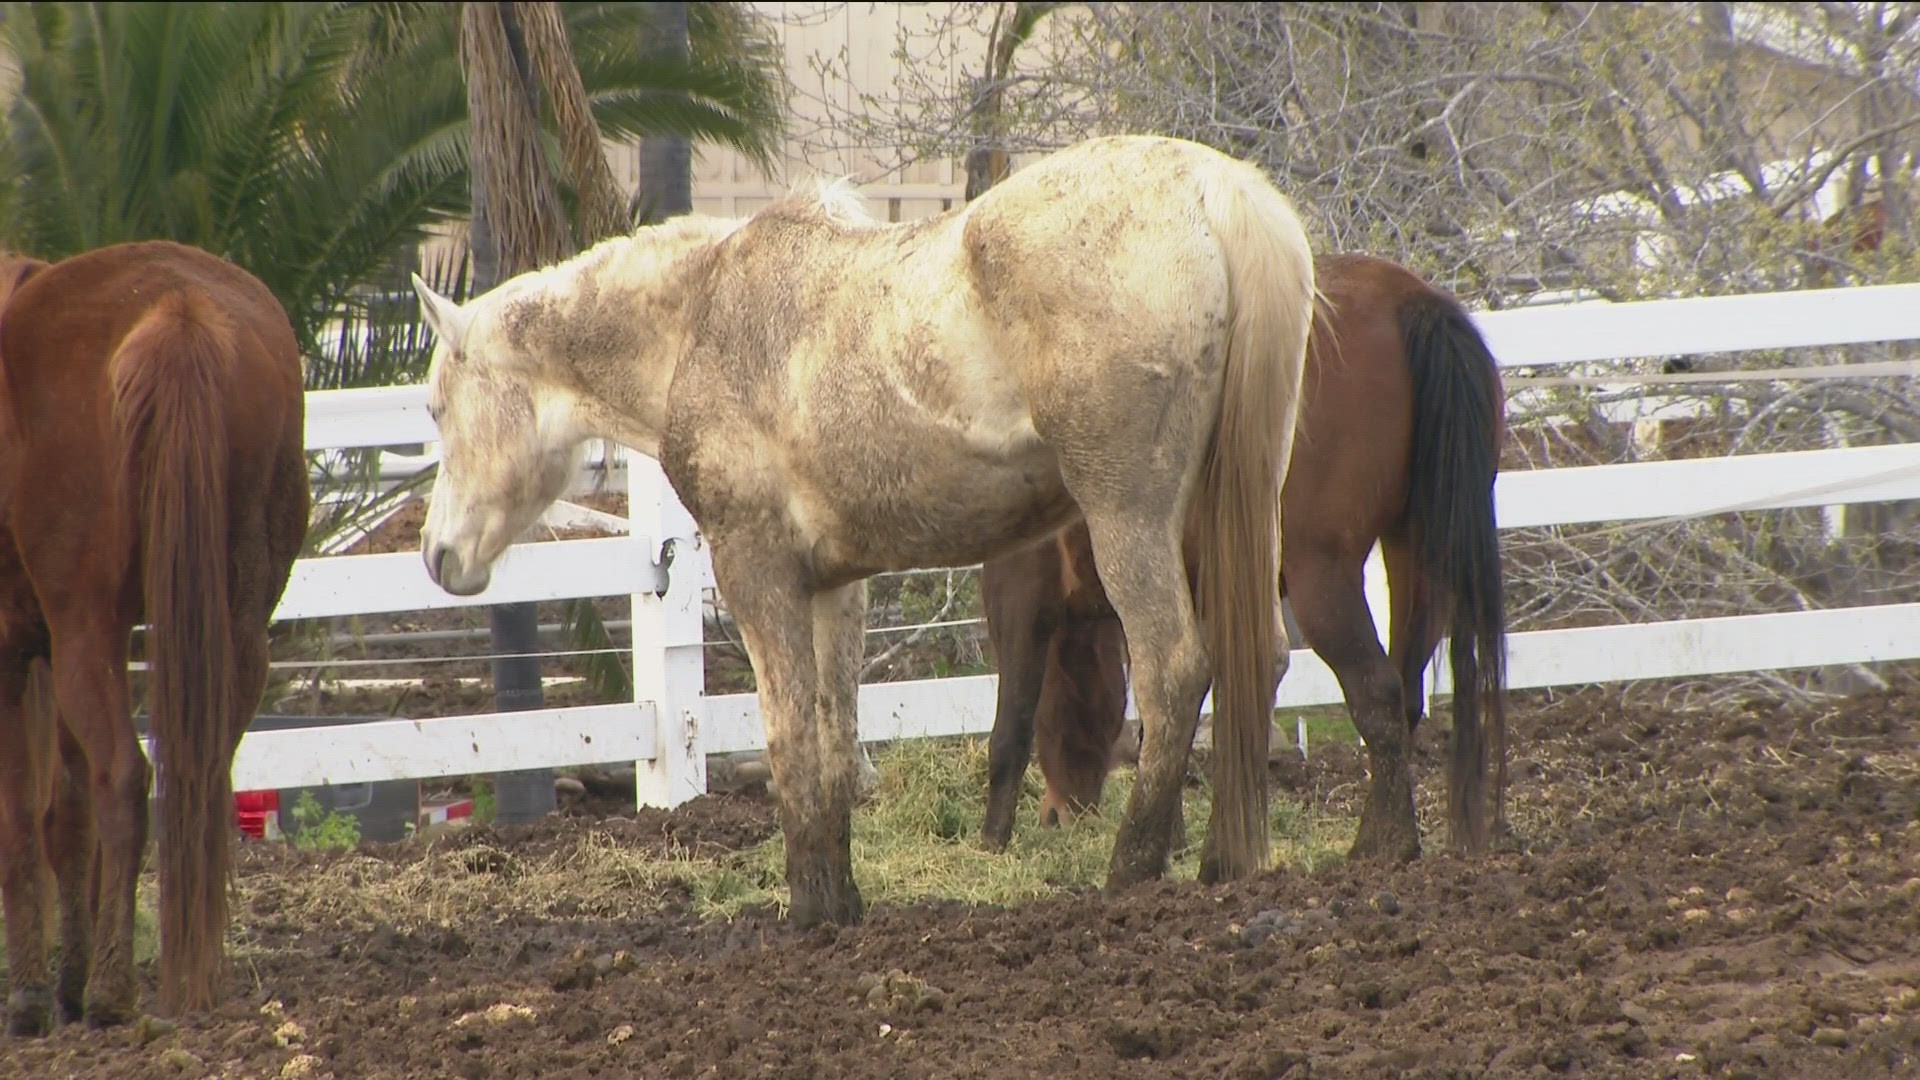 CBS 8 received more than a dozen emails about sick, neglected and dying horses at a ranch in Rancho Santa Fe.